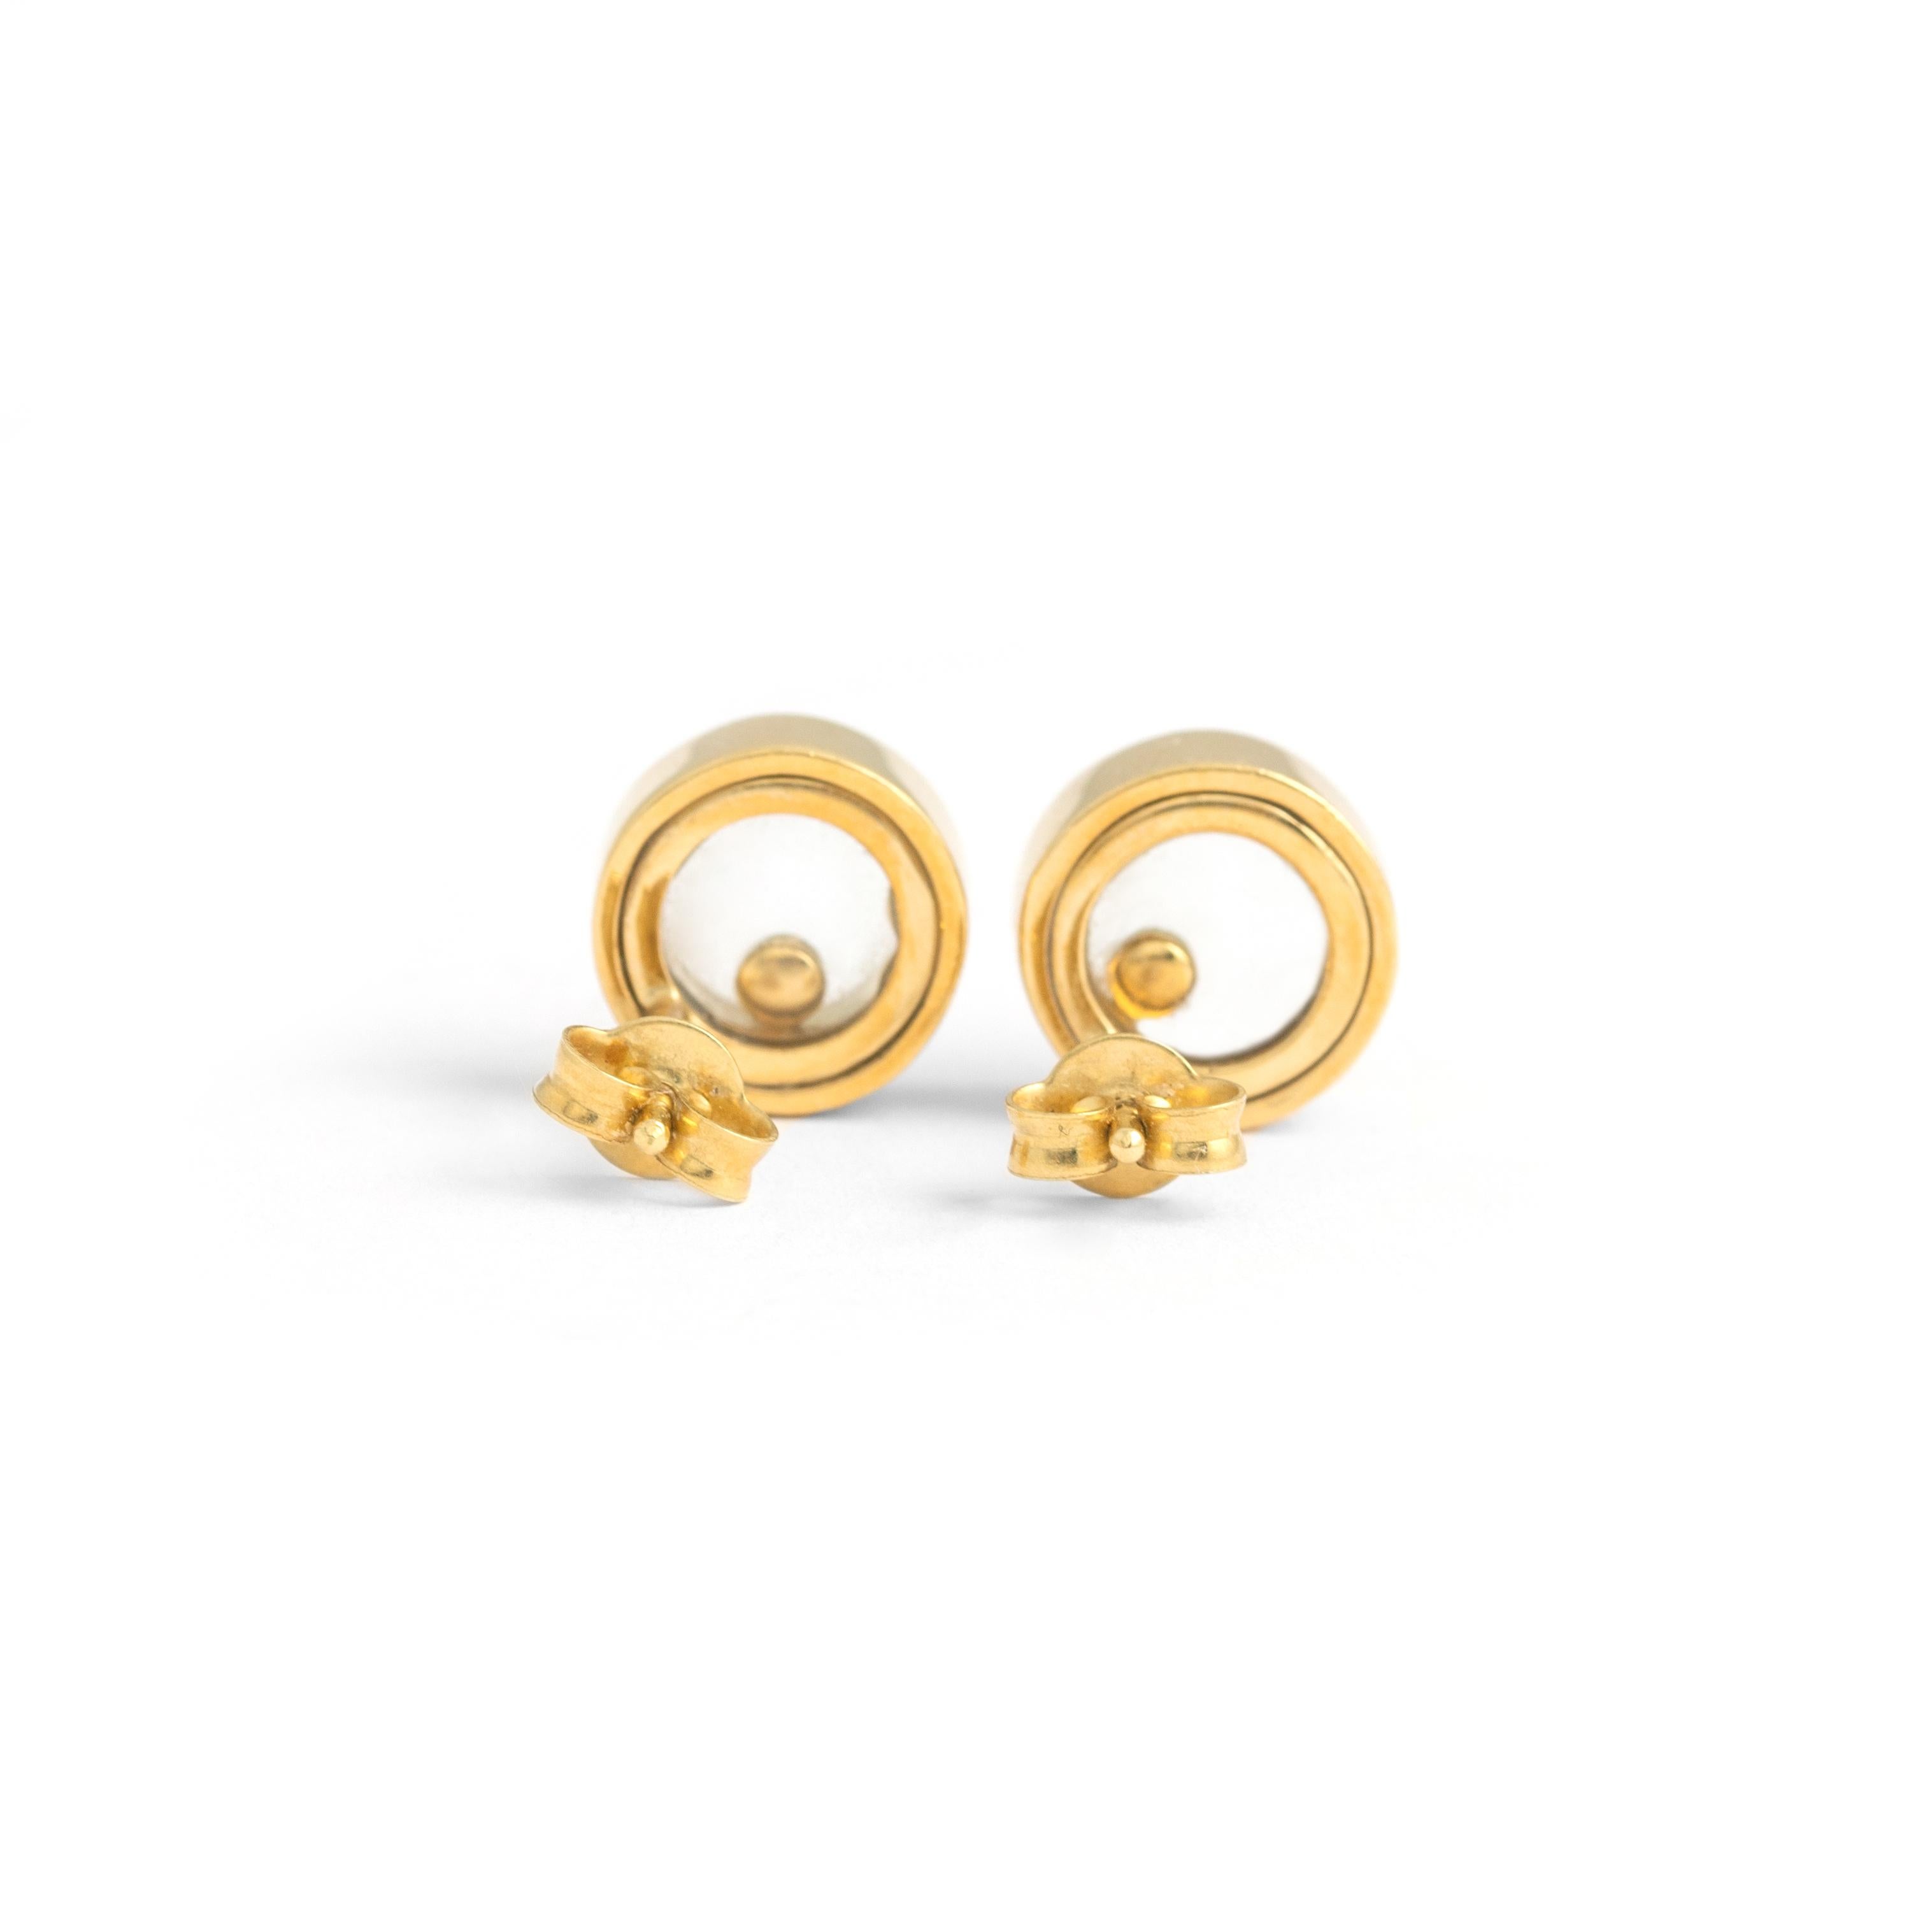 Dancing diamonds gently moving and twirling between two crystals.
Diamond Yellow Gold 18K Earrings.
Diameter: 1.00 centimeters.

Total weight: 6.36 grams
